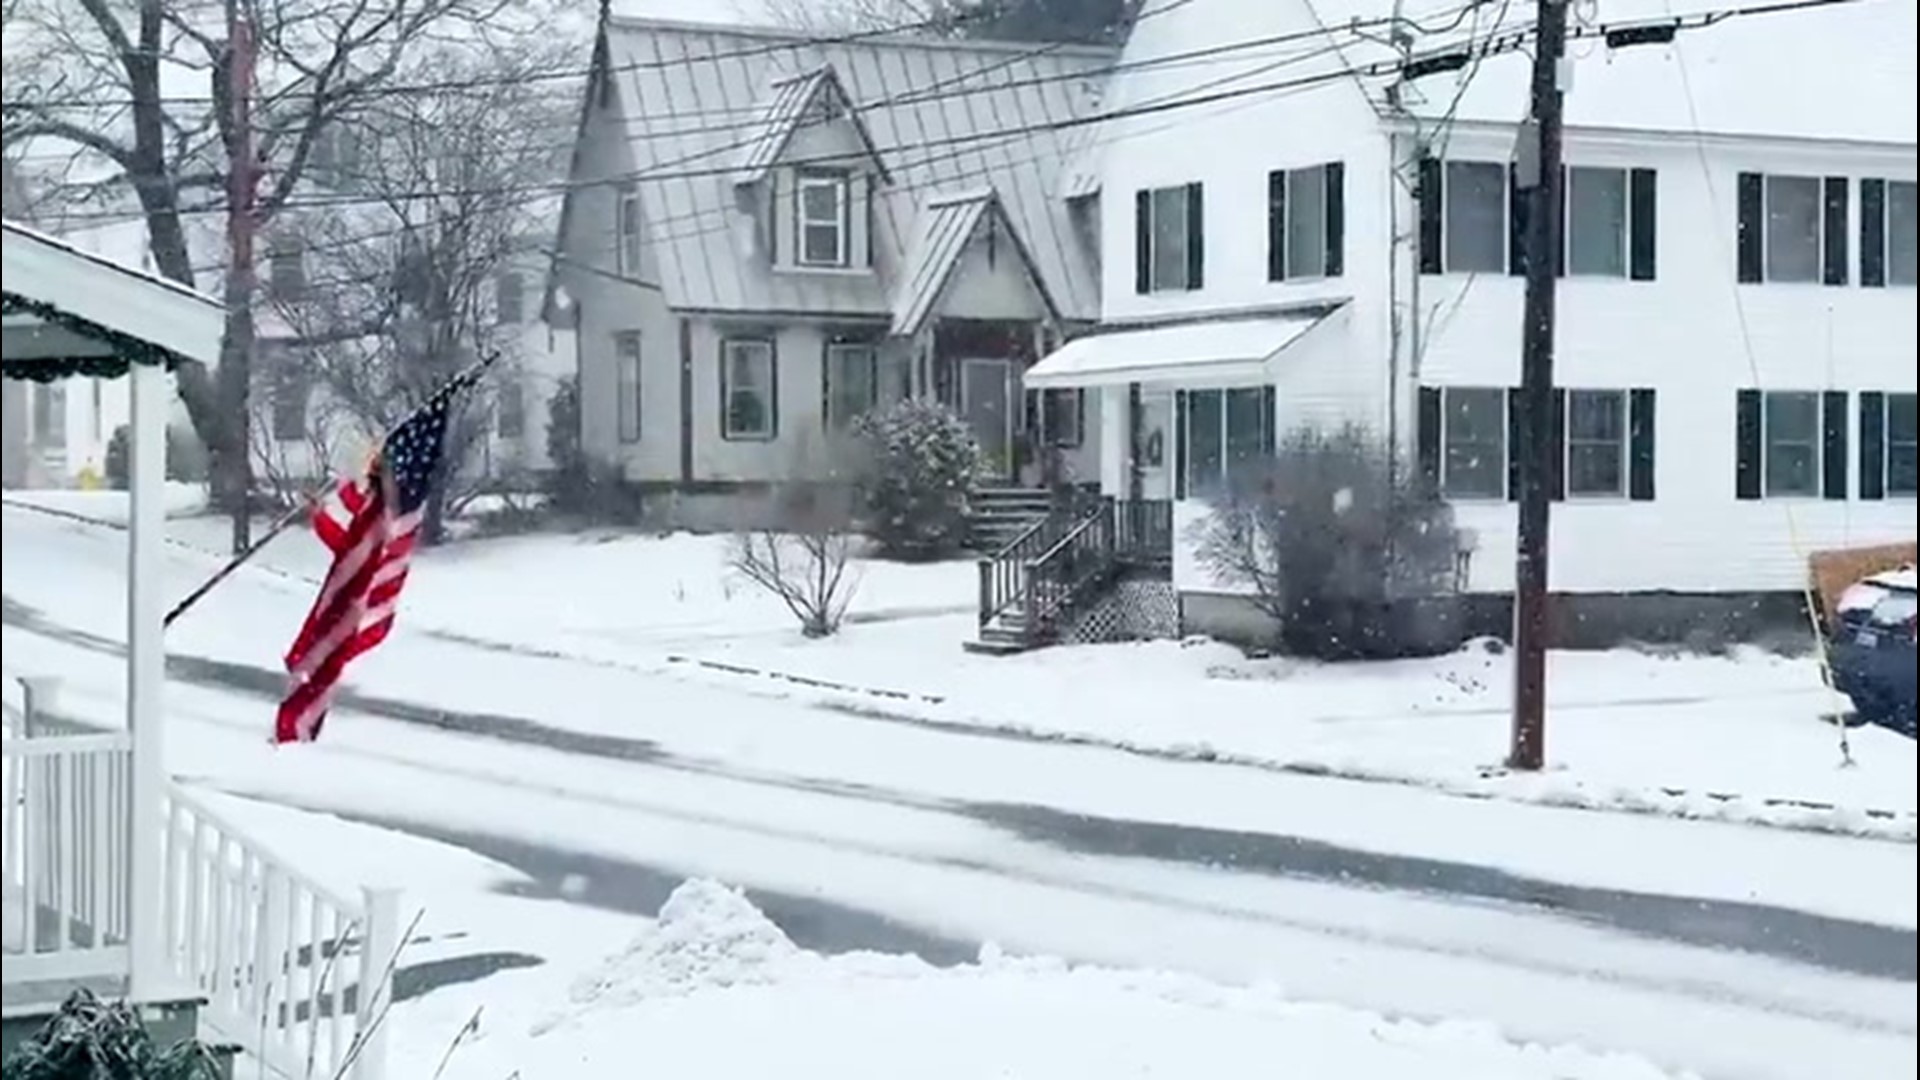 It was a snowy Saturday morning in Bath, Maine, on Jan. 2, as a storm pushed through New England.